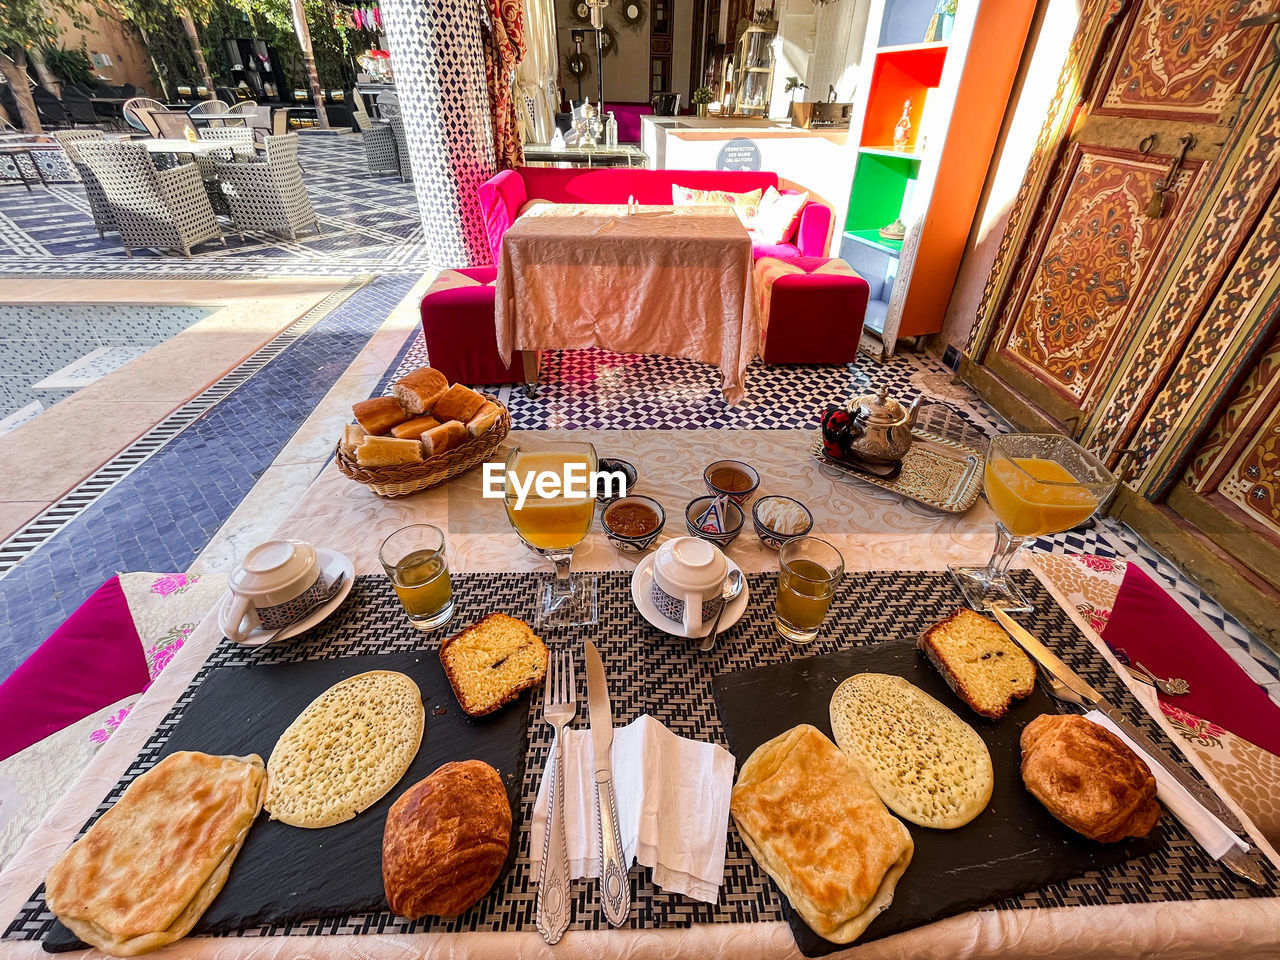 food and drink, food, table, bread, snack, freshness, no people, fast food, meal, baked, high angle view, healthy eating, day, drink, bakery, seat, chair, wellbeing, business, sweet food, plate, brunch, breakfast, outdoors, dessert, variation, still life